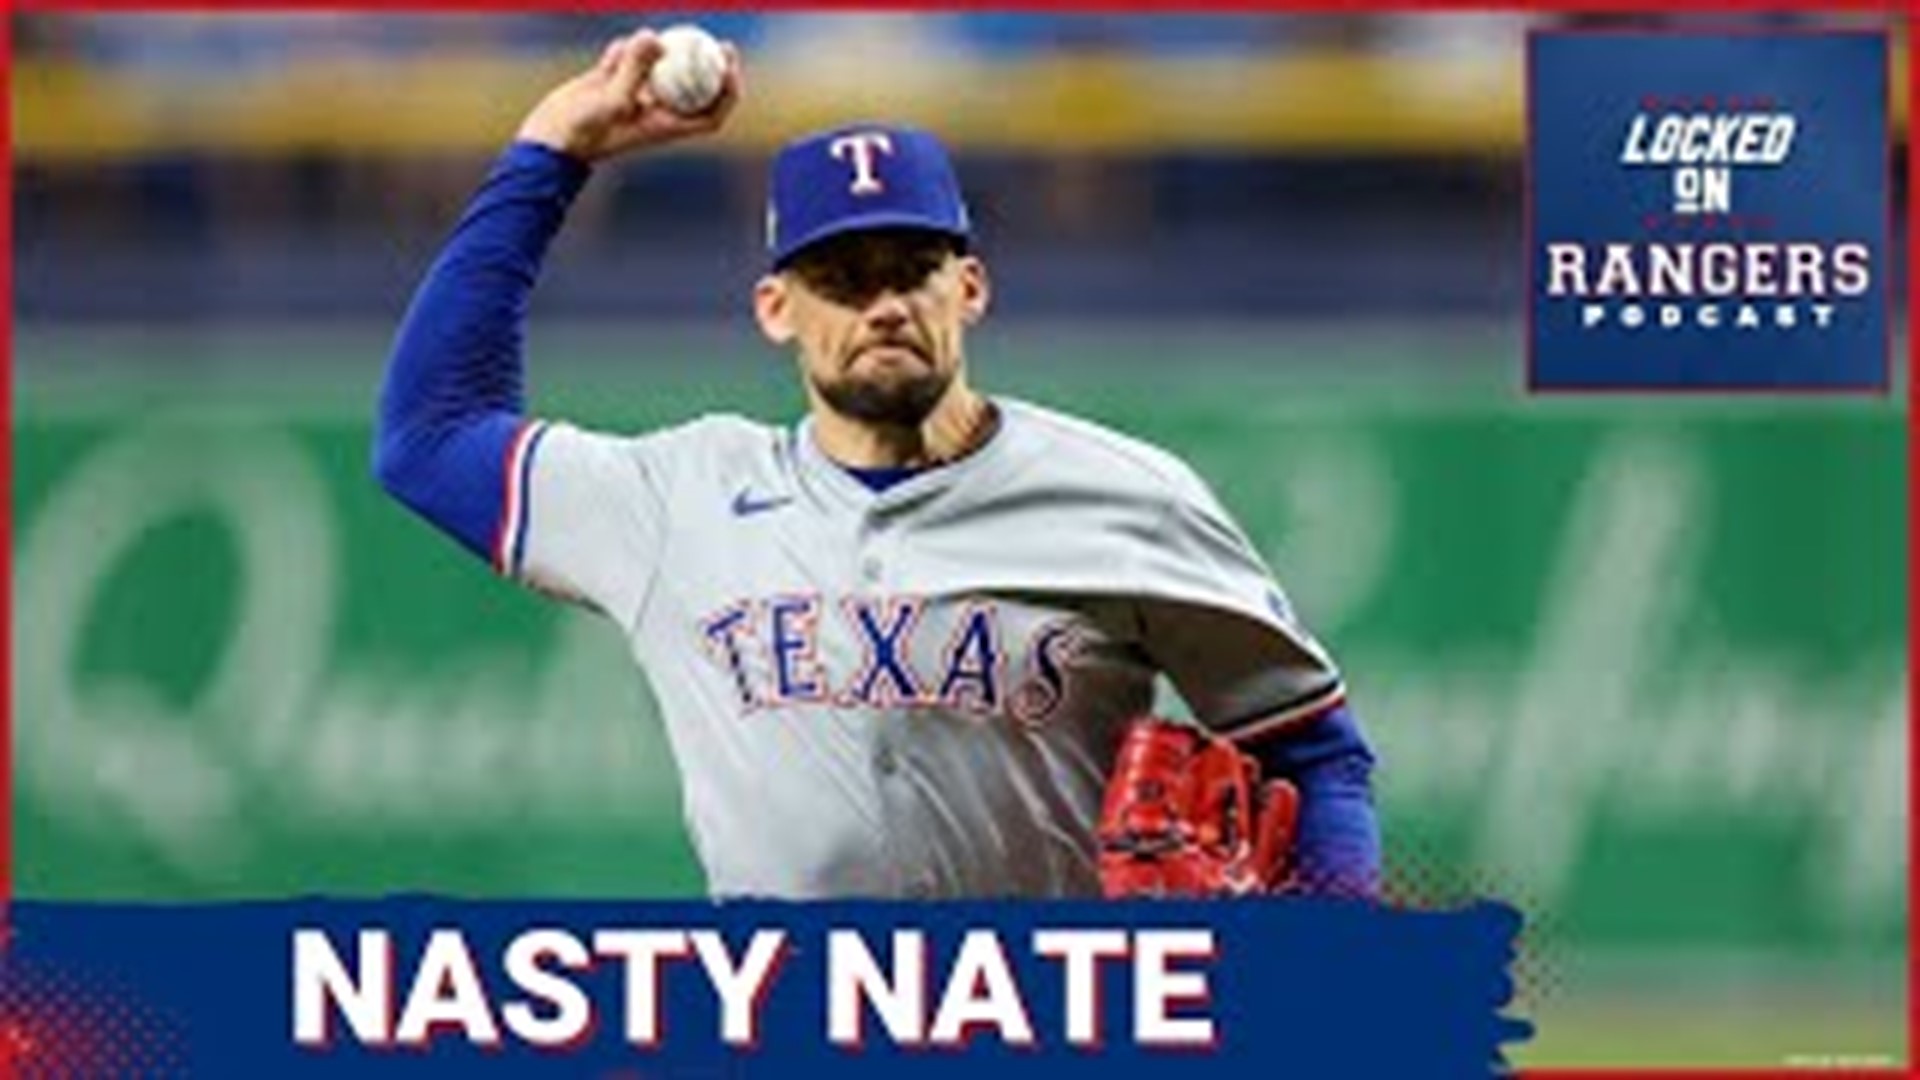 Texas Rangers All-Star Nathan Eovaldi dominated the Tampa Bay Rays in his second start this season, stepping up when his team needed him most.